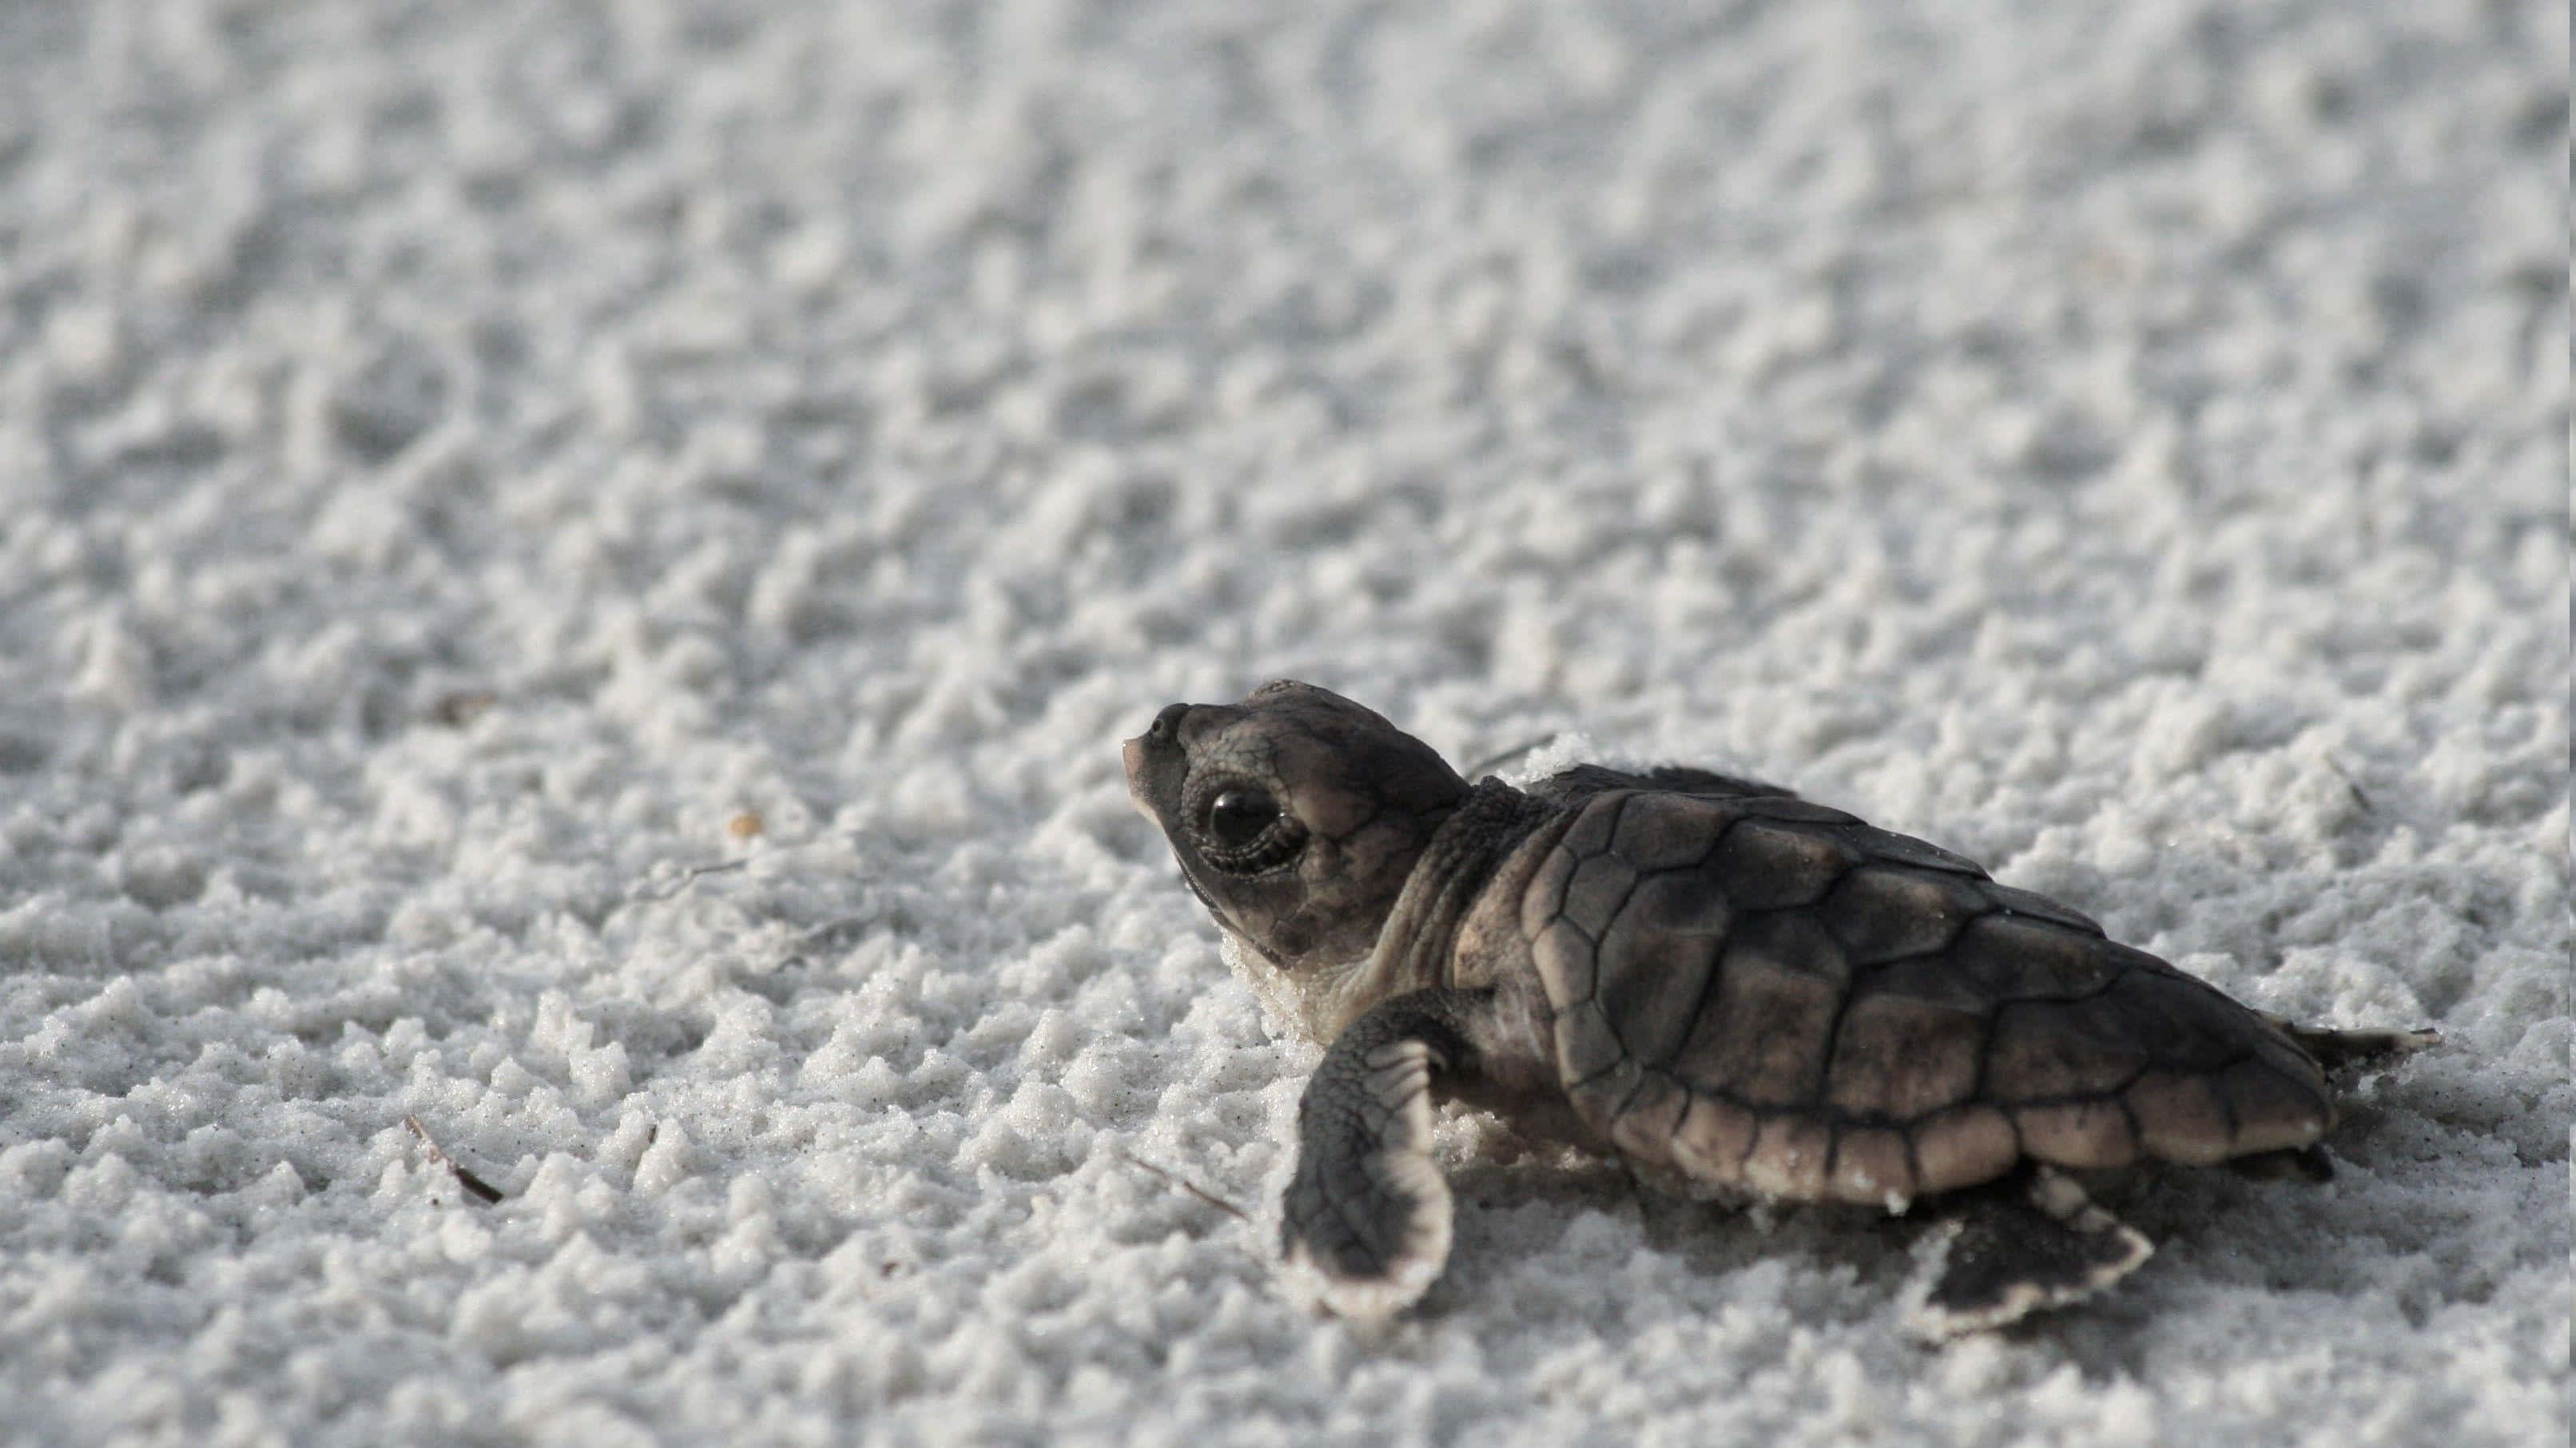 A Little Cutie Pie Turtle Staying Safe"